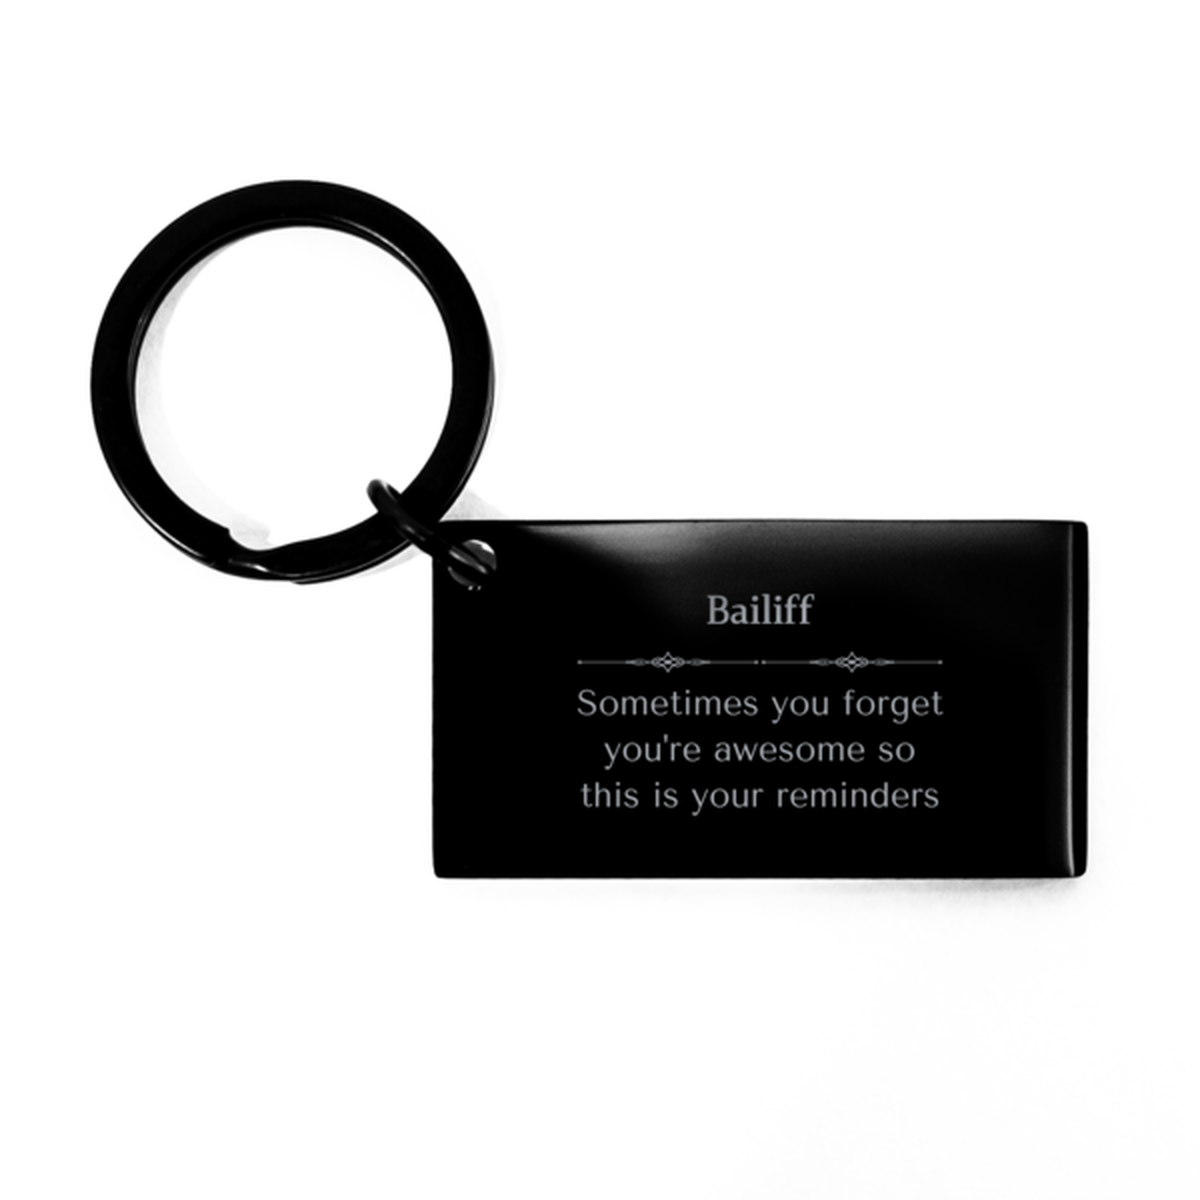 Sentimental Bailiff Keychain, Court Reporter Sometimes you forget you're awesome so this is your reminders, Graduation Christmas Birthday Gifts for Bailiff, Men, Women, Coworkers